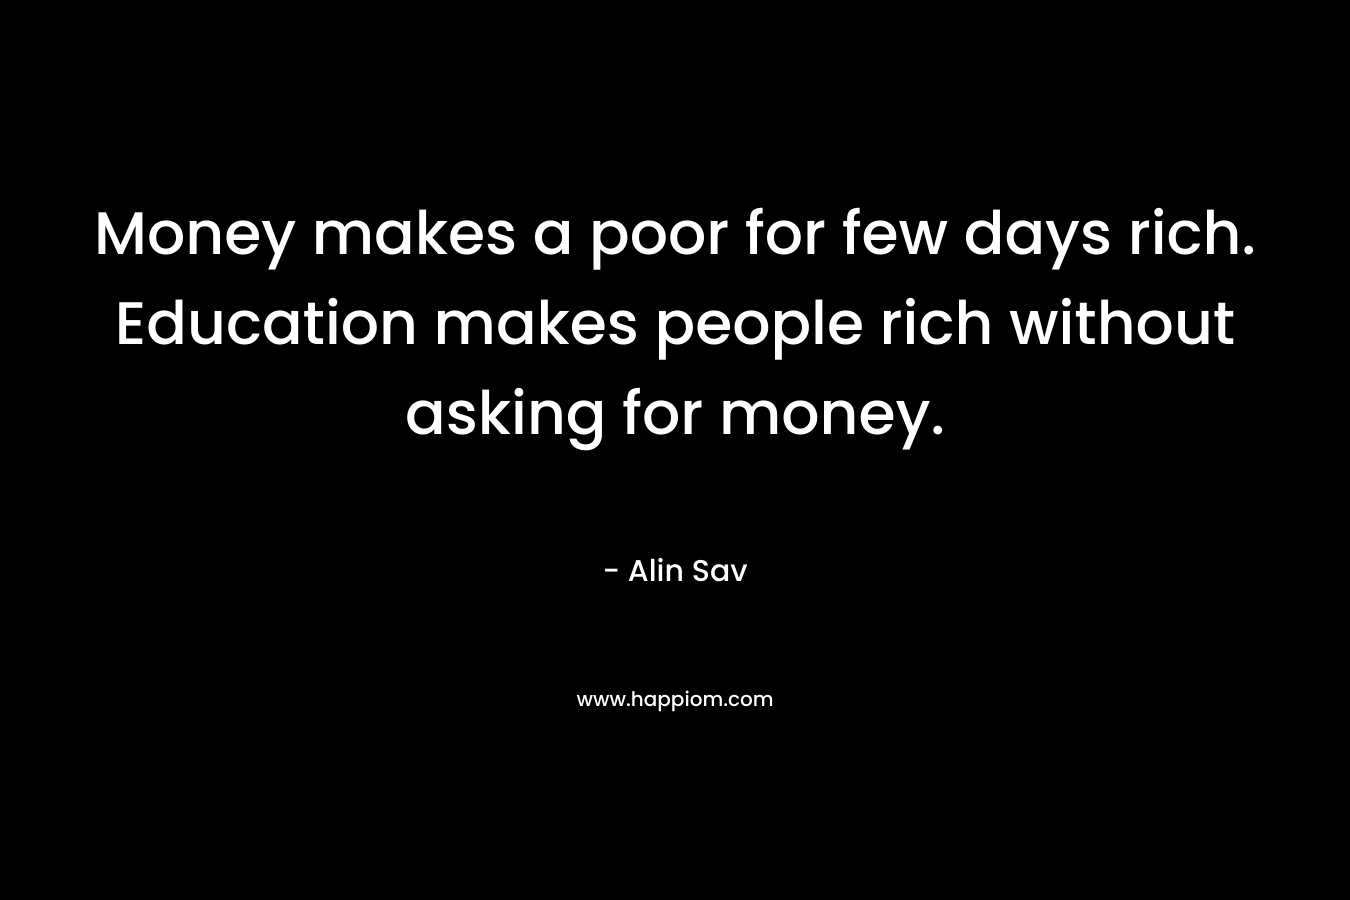 Money makes a poor for few days rich. Education makes people rich without asking for money.